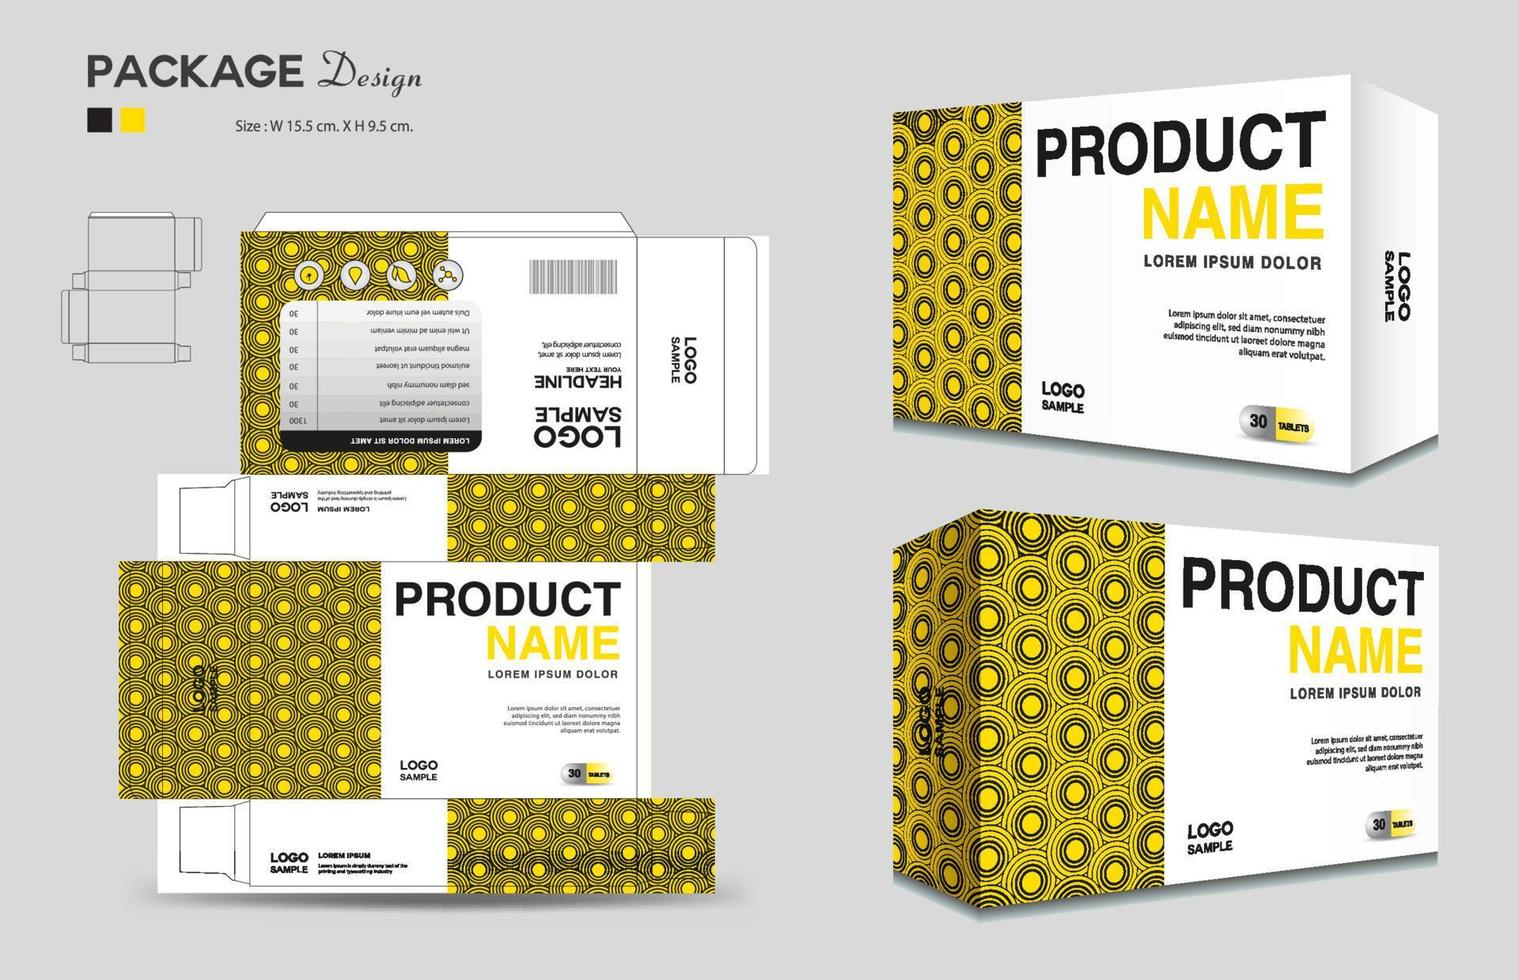 Cosmetic box design, Supplements box template, Package design template, 3d Box Packaging design, cosmetic label, medical label, soap label, packaging design vector, Package boxes mockup vector